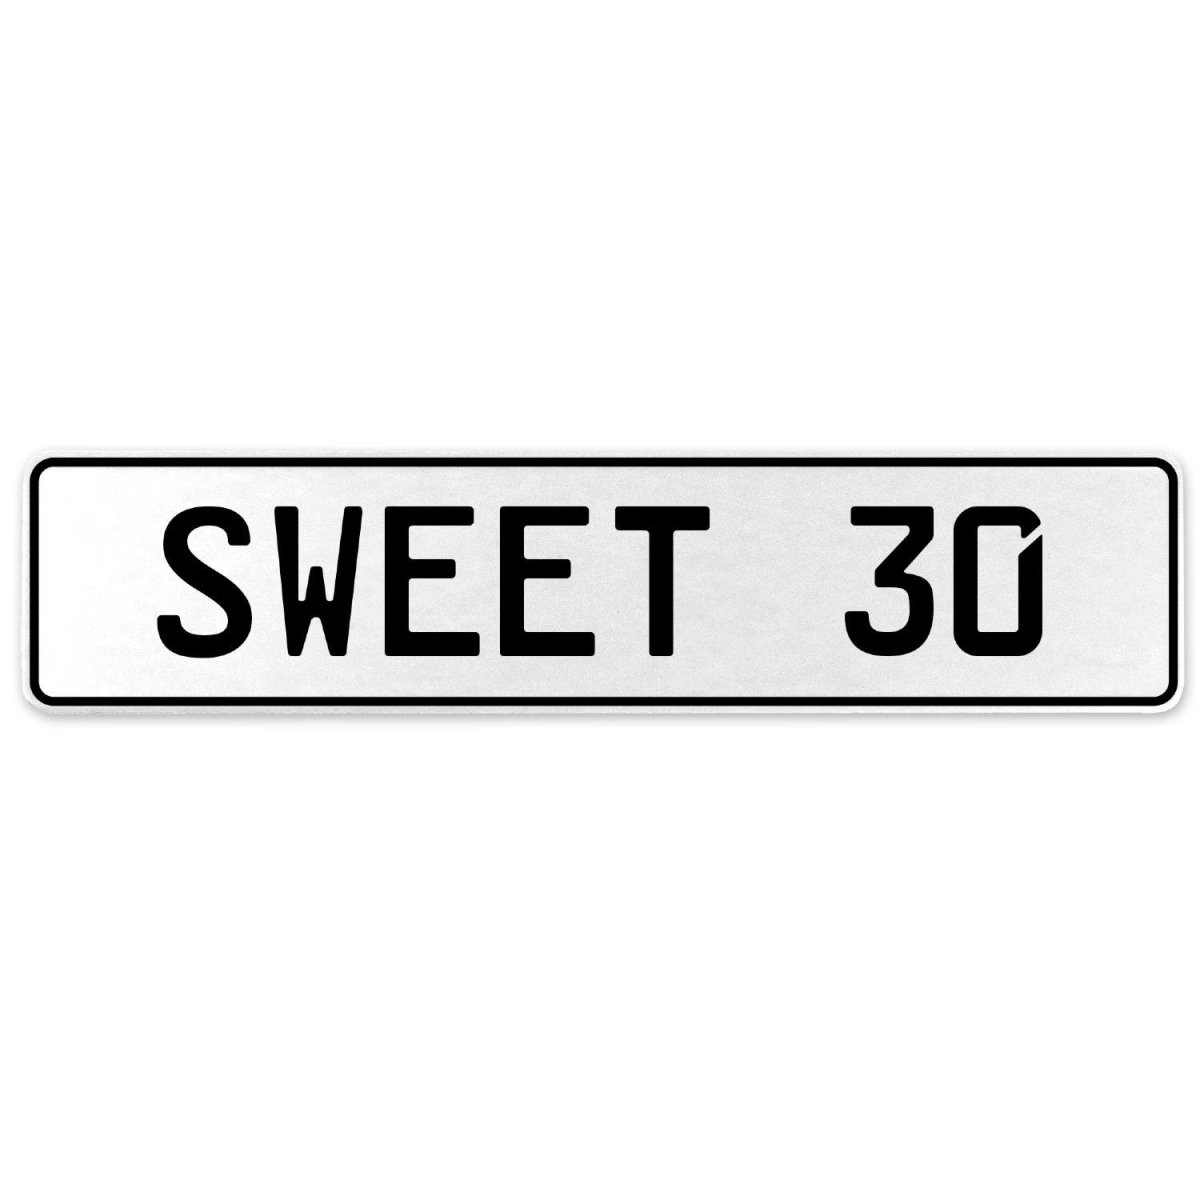 554132 Sweet 30 - White Aluminum Street Sign Mancave Euro Plate Name Door Sign Wall